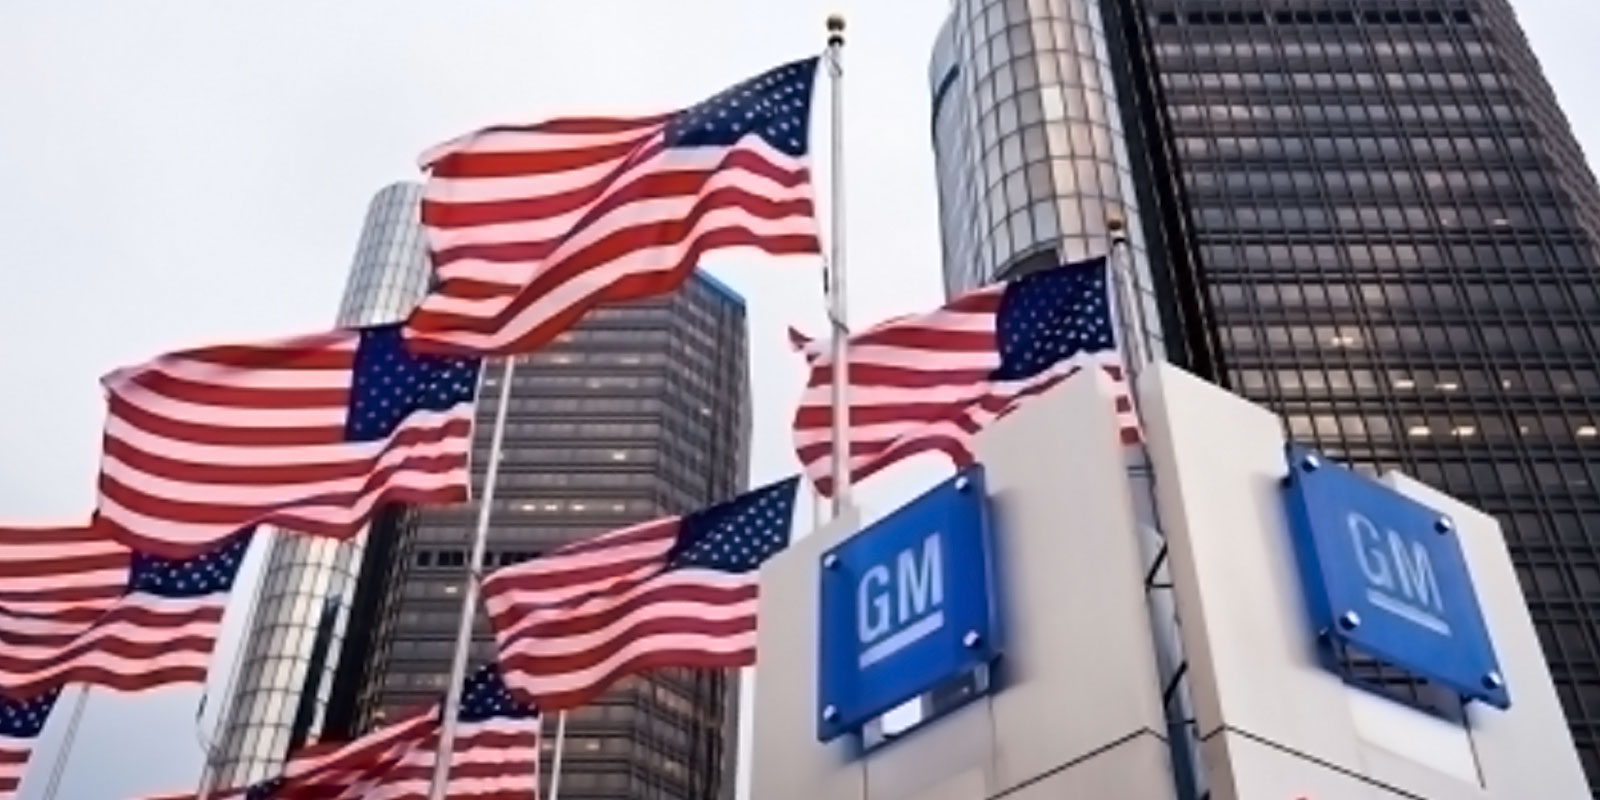 GM Issues Worldwide Power Steering Recall for 1.2 Million Vehicles